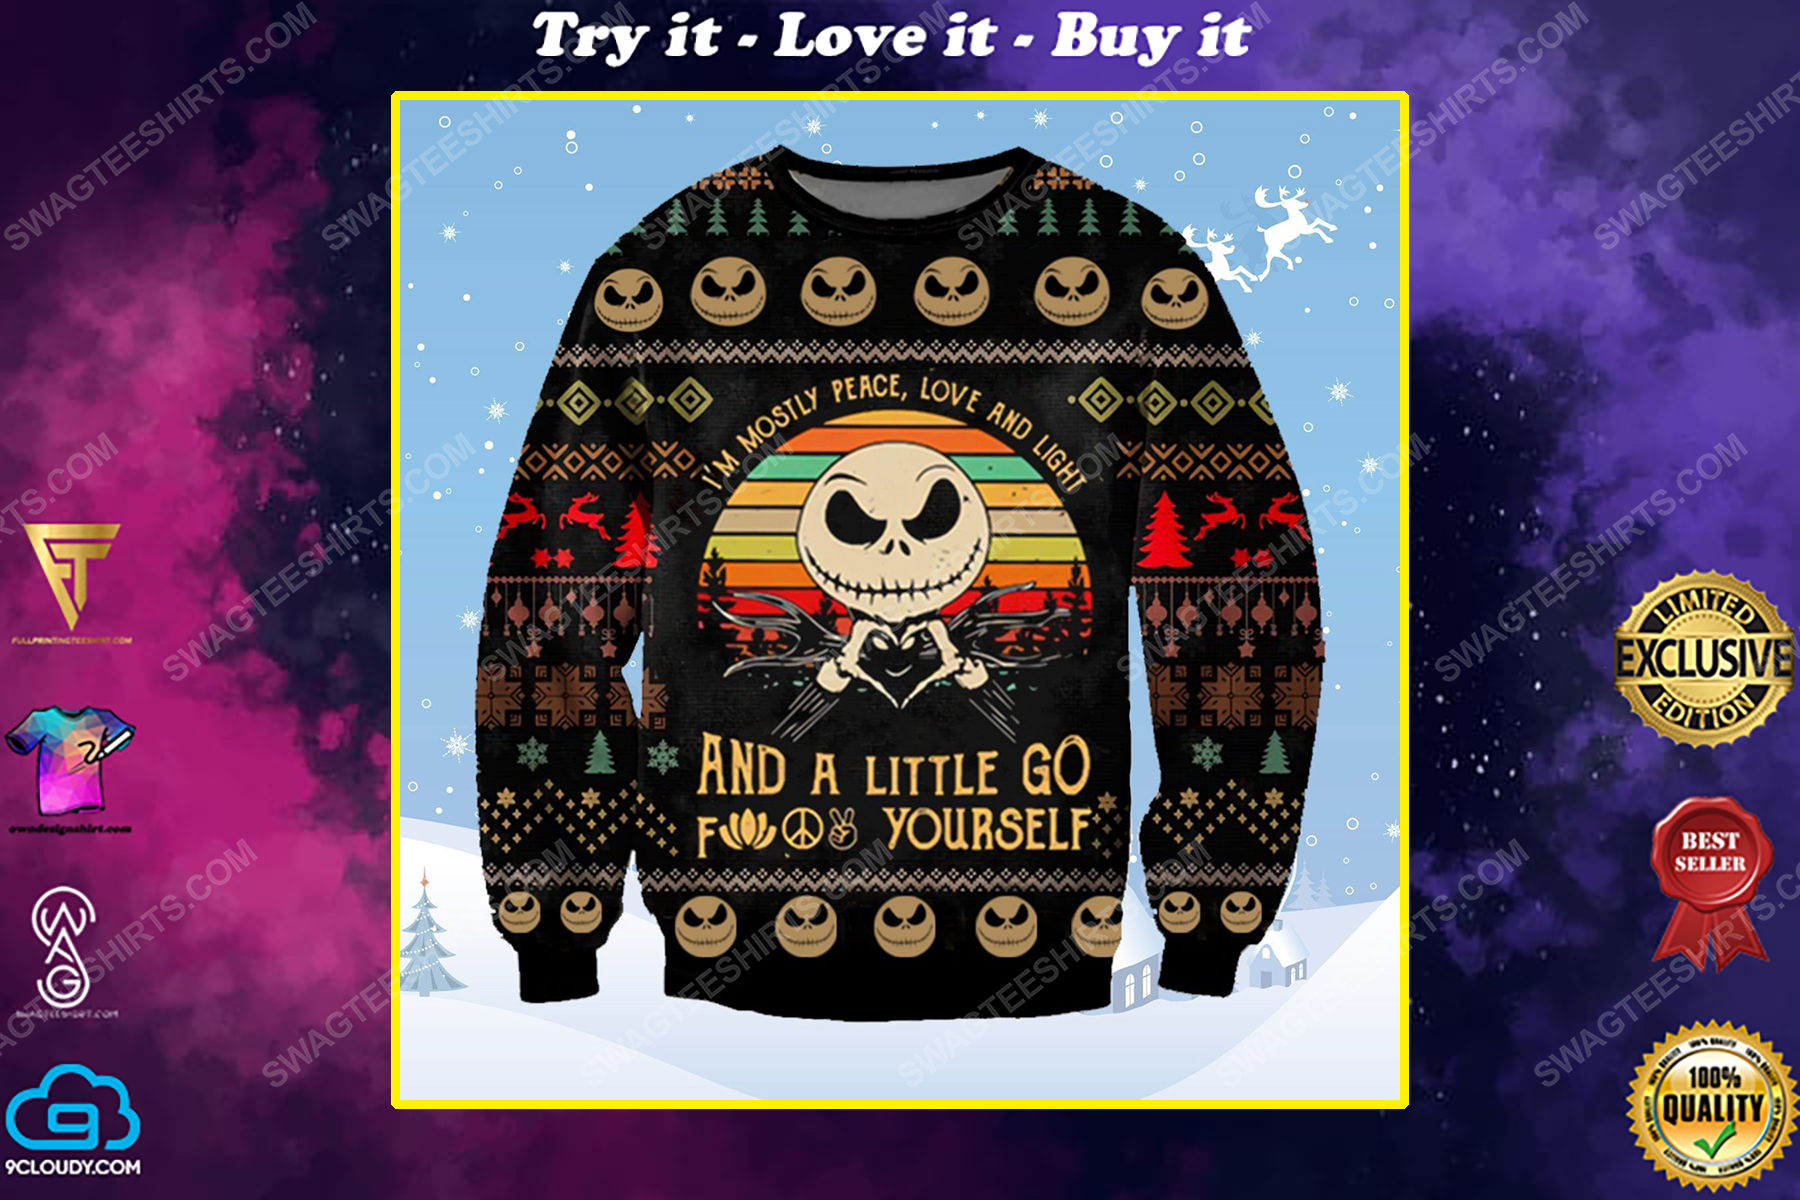 Jack skellington i'm mostly peace love and light ​ugly christmas sweater 1